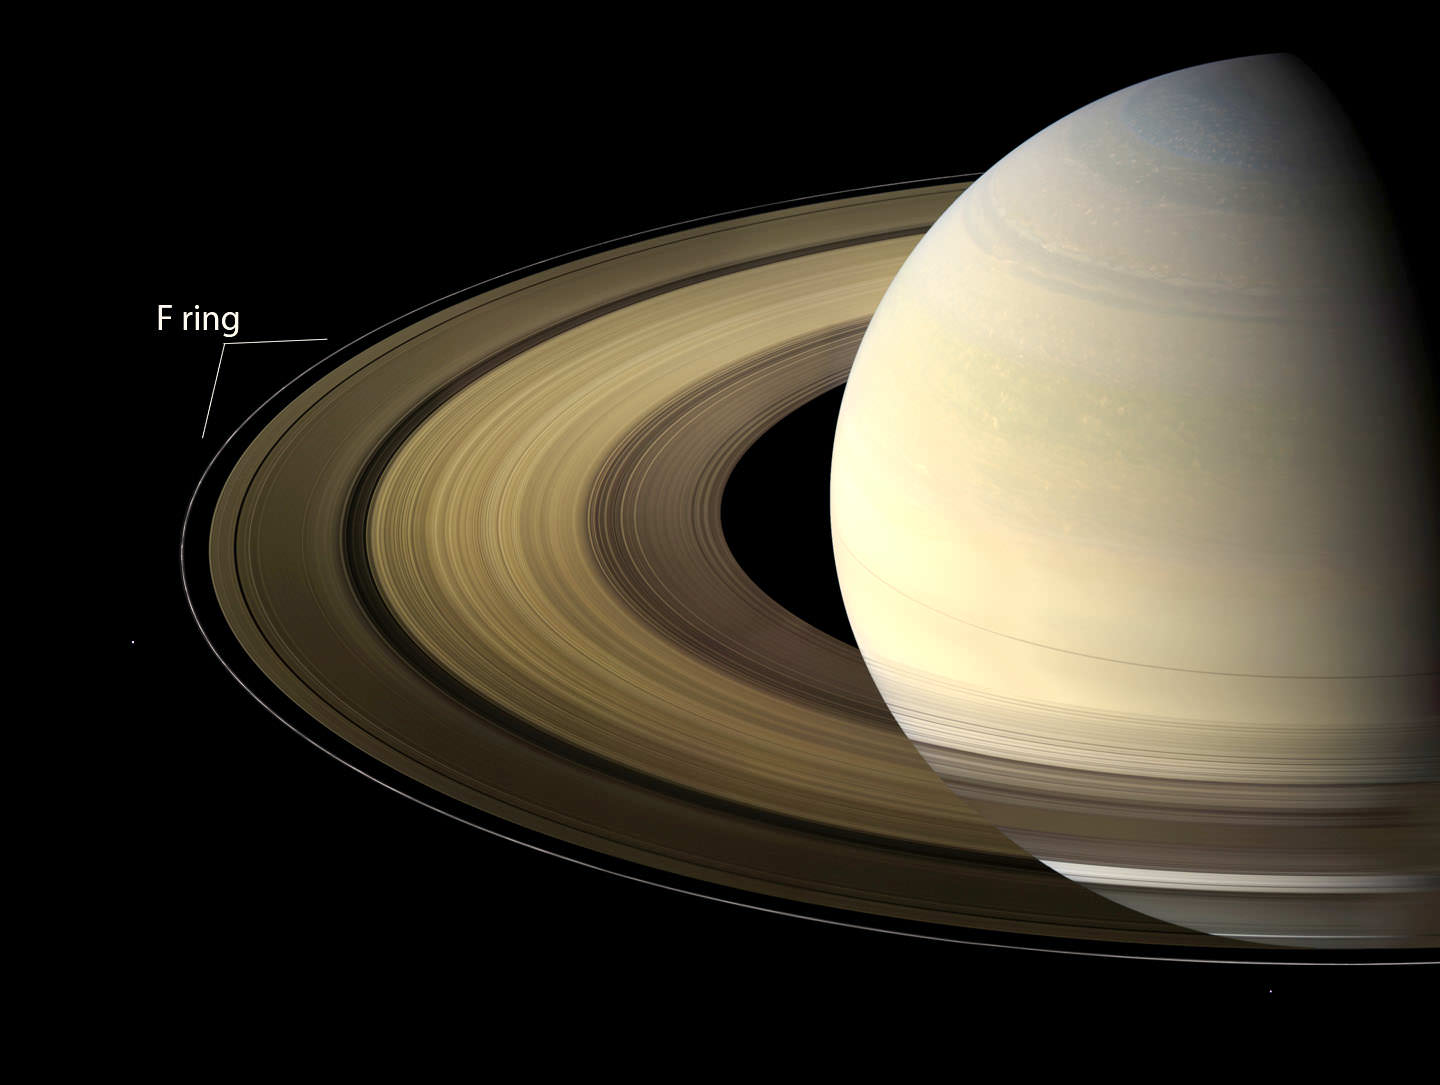 Fact check: Image of Saturn is artist's rendering, not up-close photo